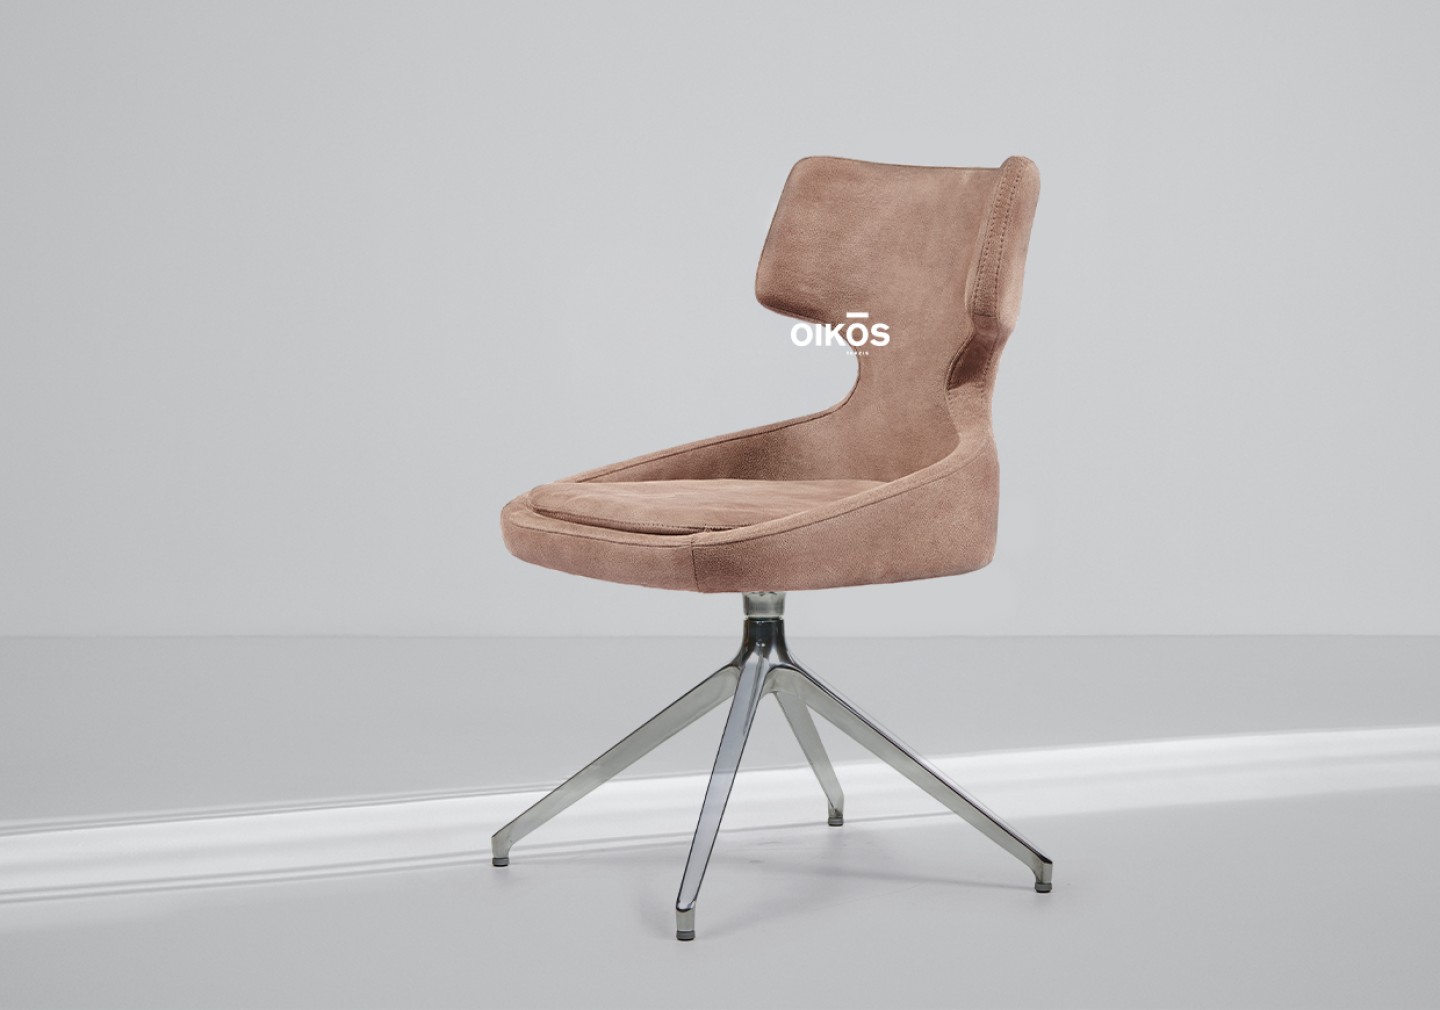 THE NEW ARABELLA DINING CHAIR